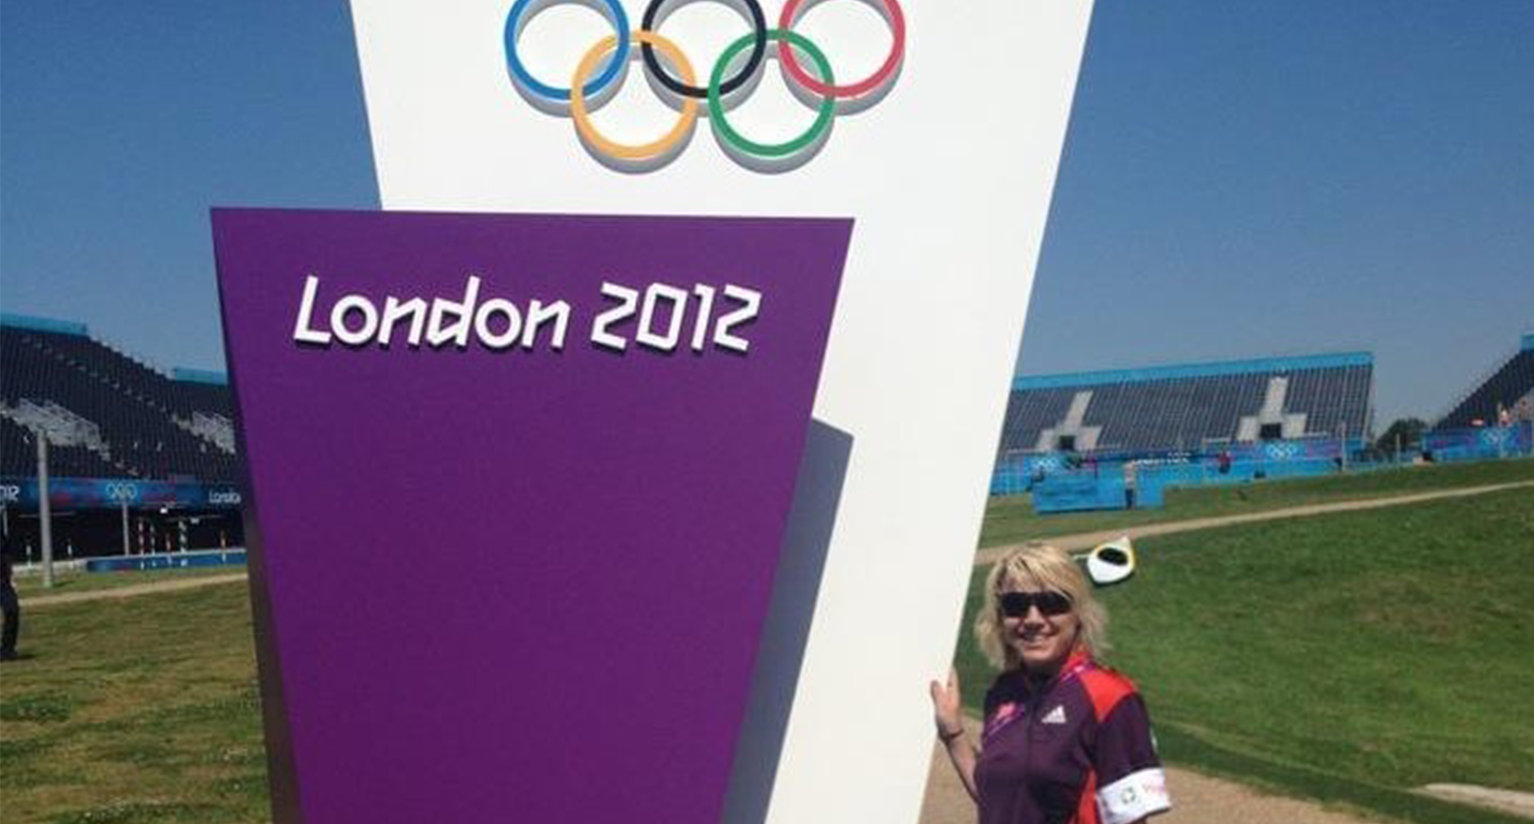 Charlie at the 2012 Olympics